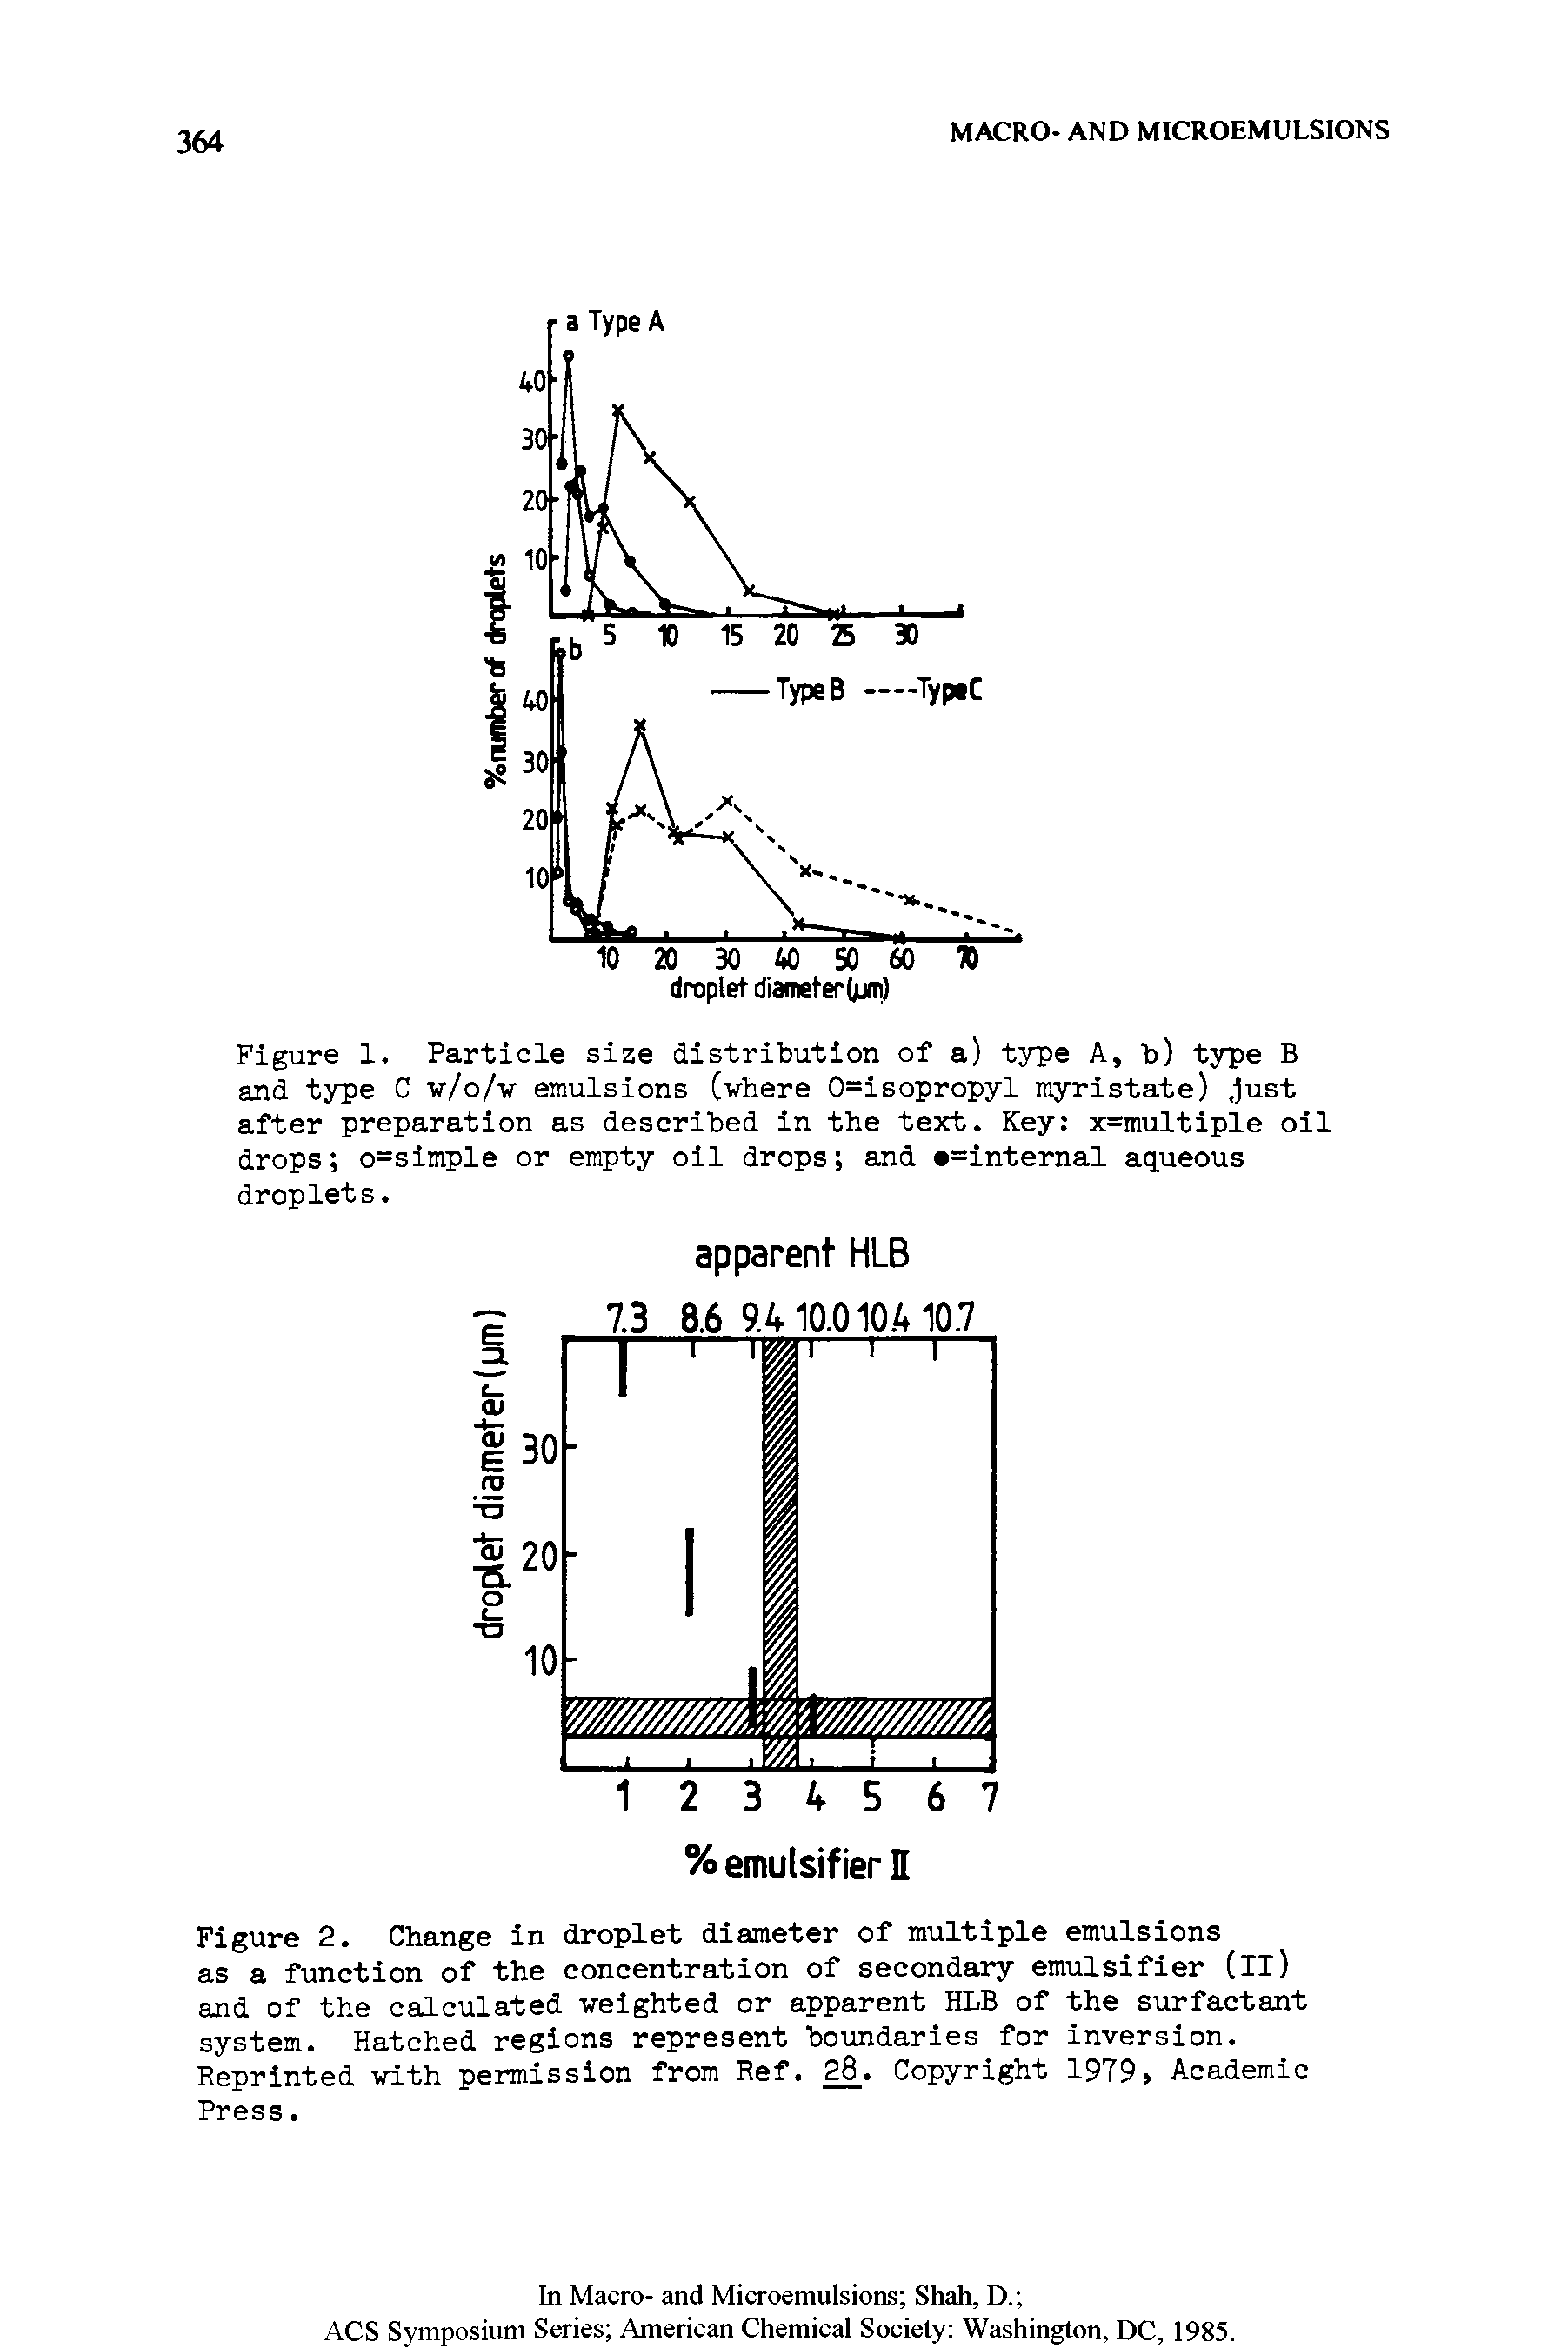 Figure 2. Change in droplet diameter of multiple emulsions as a function of the concentration of secondary emulsifier (il) and of the calculated weighted or apparent HLB of the surfactant system. Hatched regions represent boundaries for inversion. Reprinted with permission from Ref. 28. Copyright 1979, Academic Press.